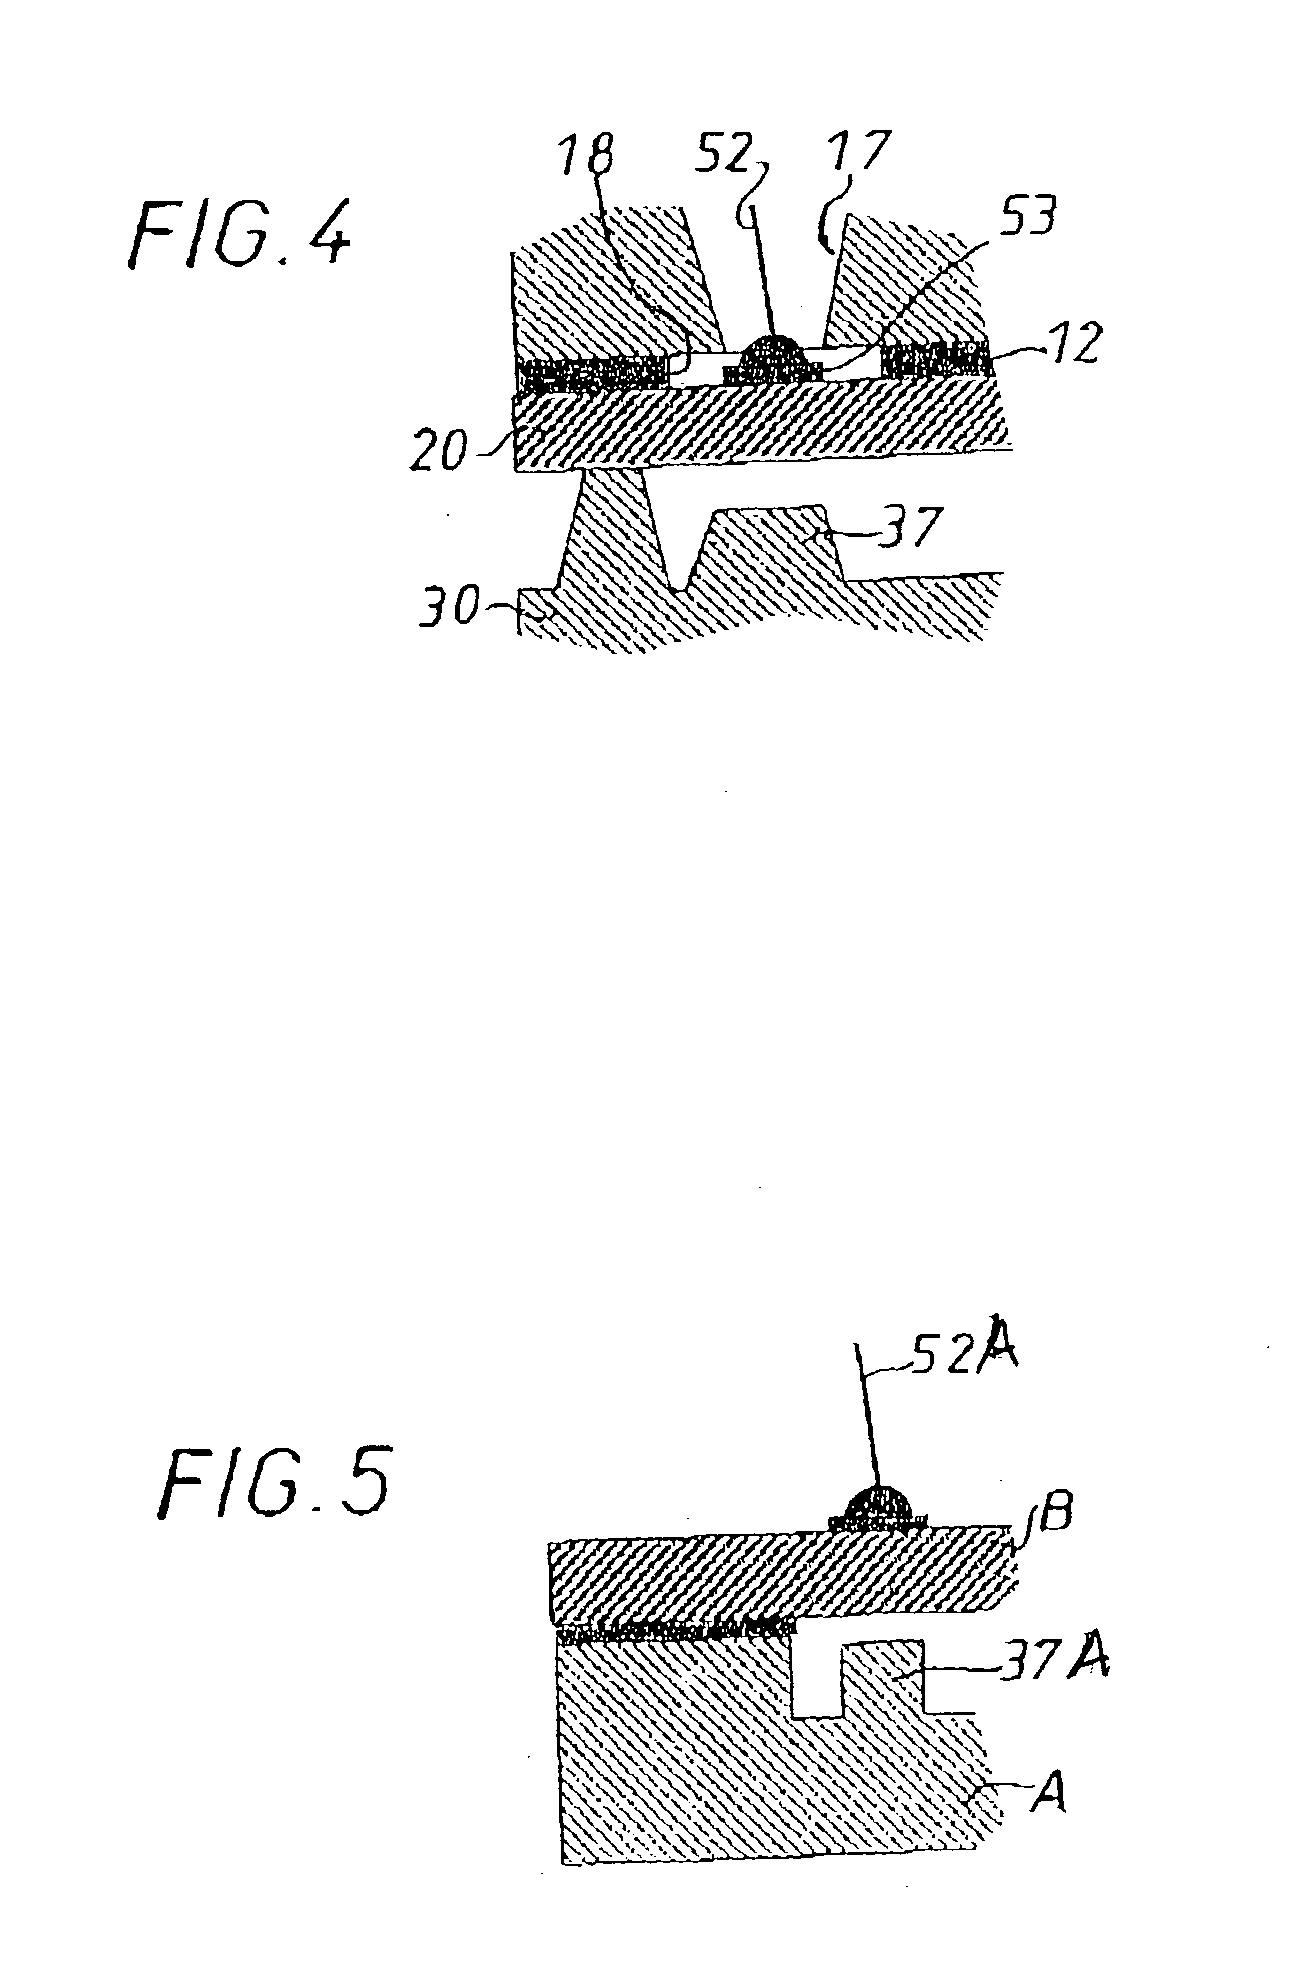 Method of reinforcing a mechanical microstructure